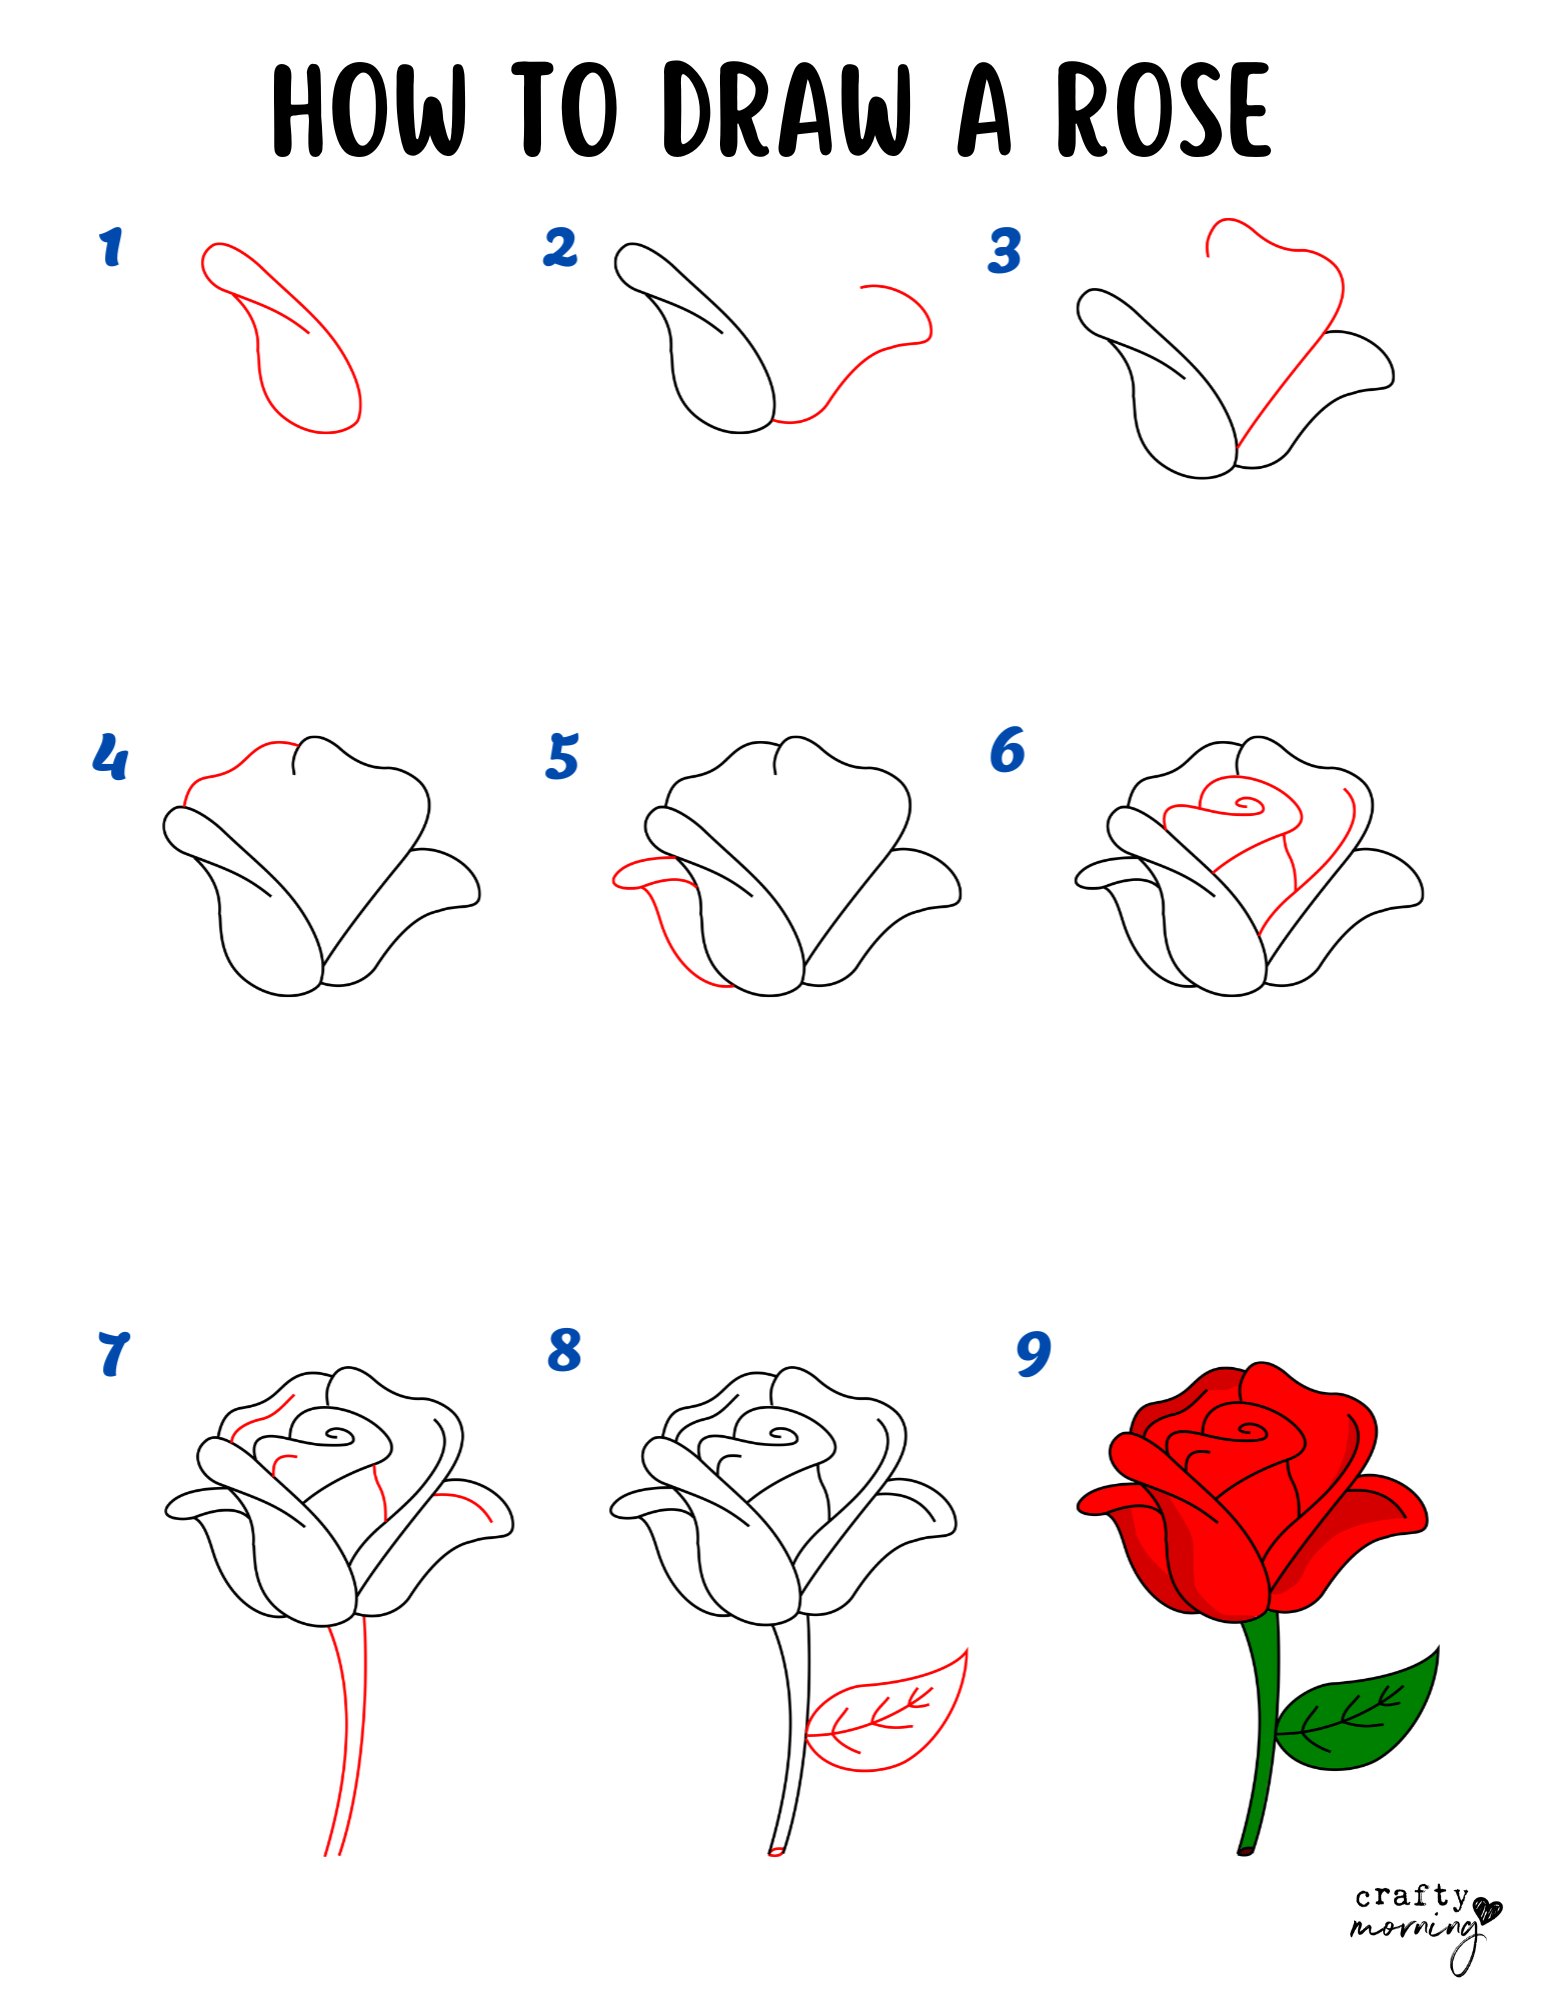 HOW TO DRAW A ROSE,EASY DRAWING,STEP BY STEP DRAWING FOR KIDS,EASY ART -  video Dailymotion